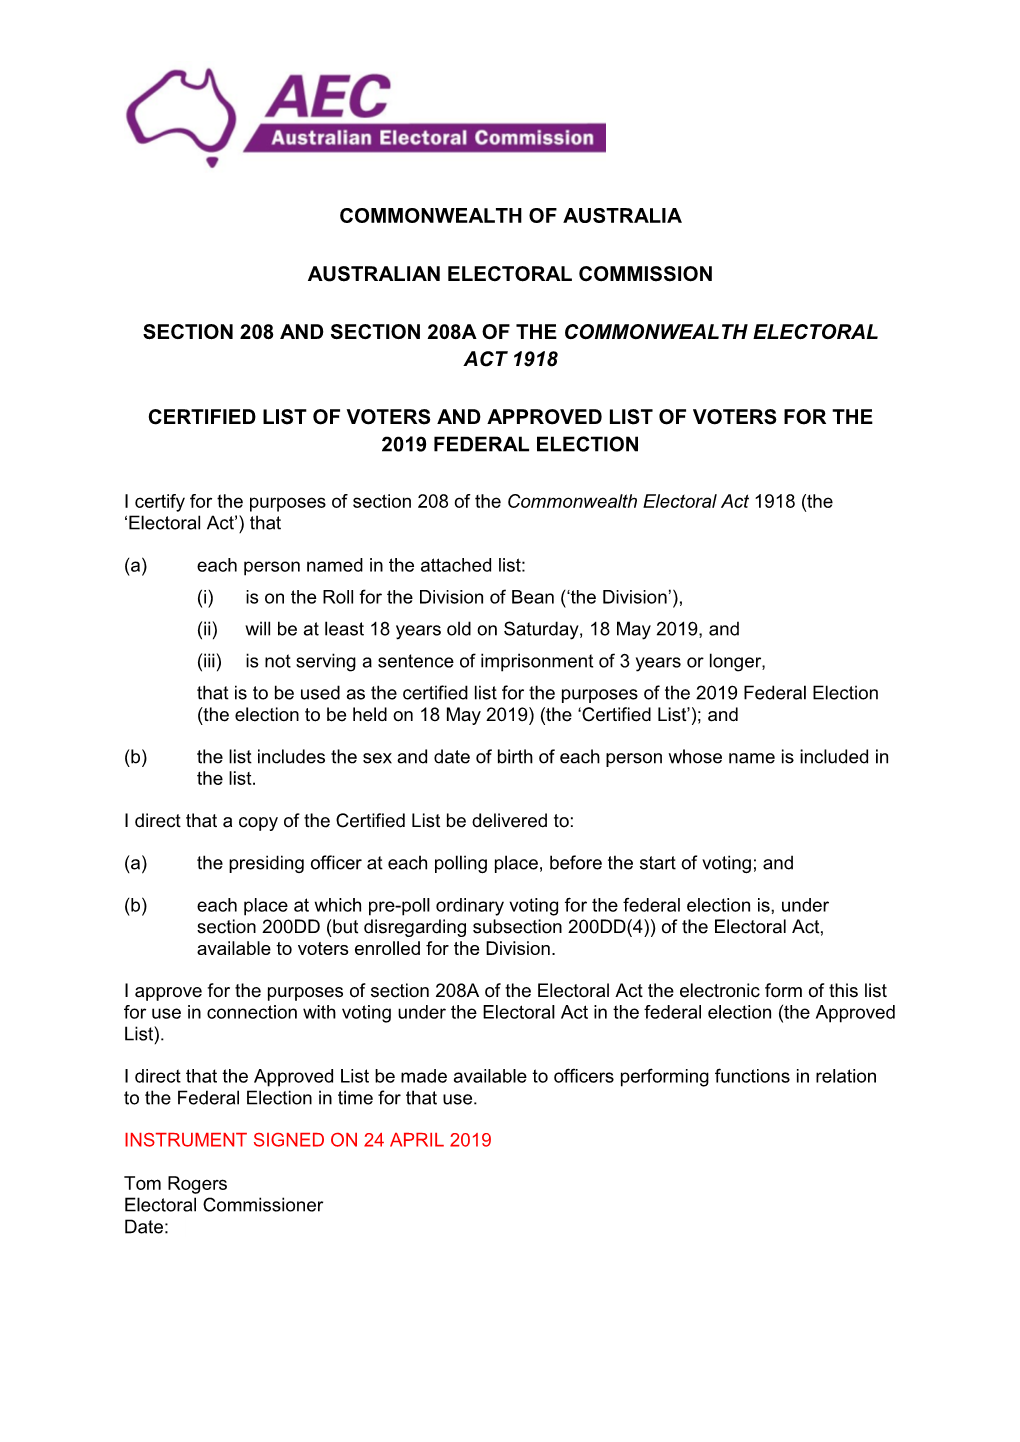 Certification of the Certified List of Voters for the 2019 Federal Election